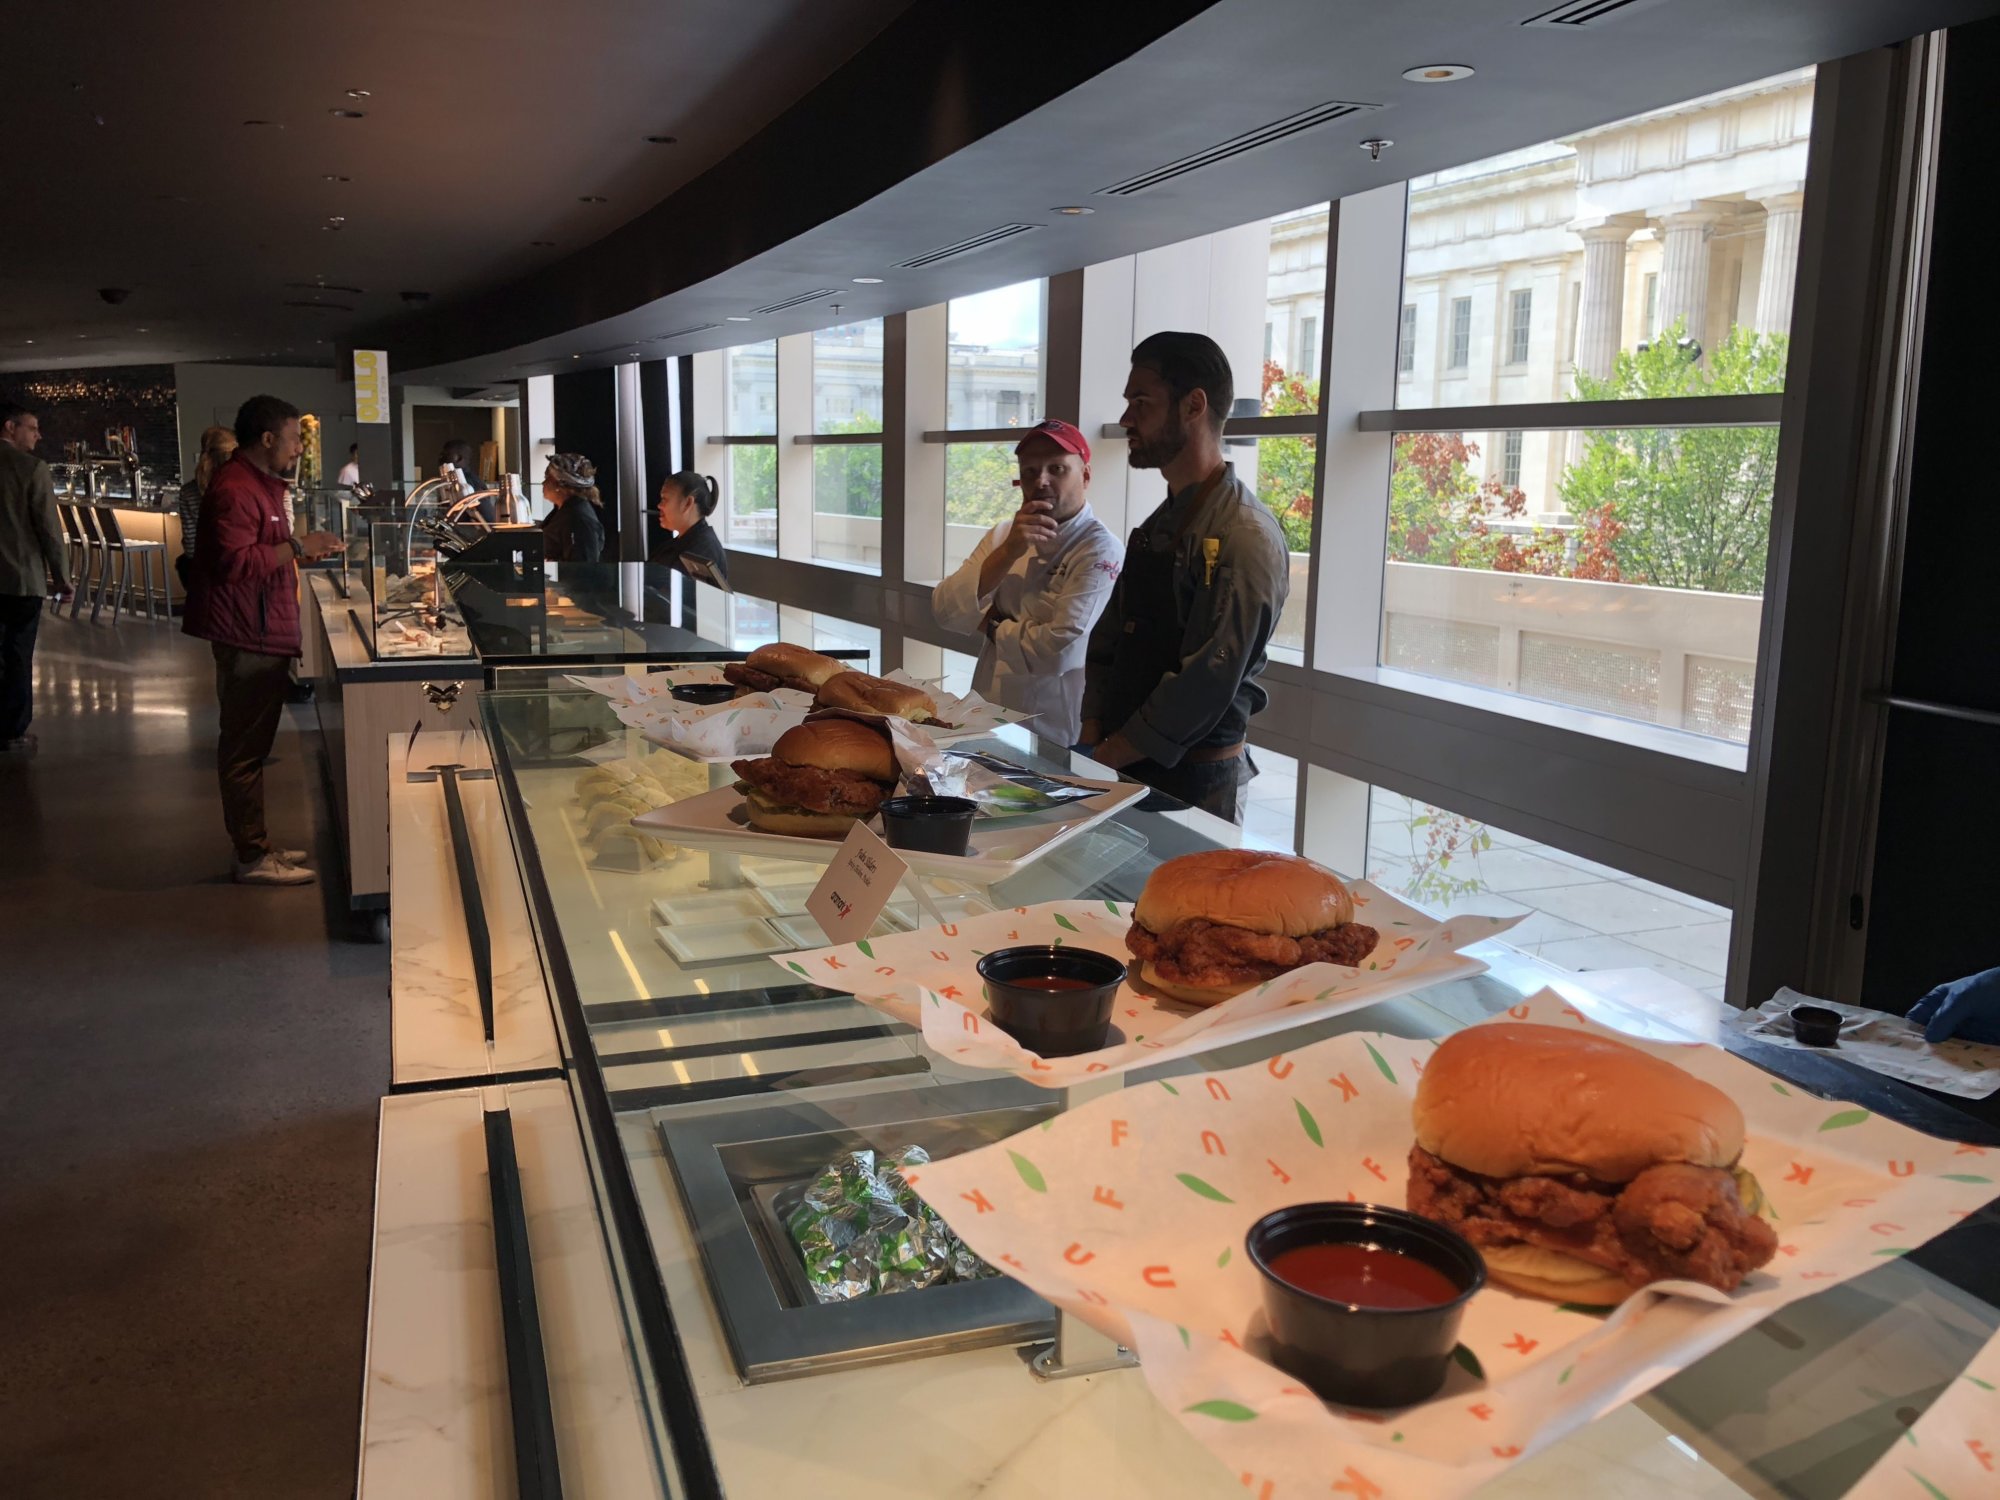 Food items in the PwC Club are available for anyone in the arena to purchase. Offerings include a chef attended carving station, gourmet deserts and made-to-order pizza. (WTOP/Kristi King)